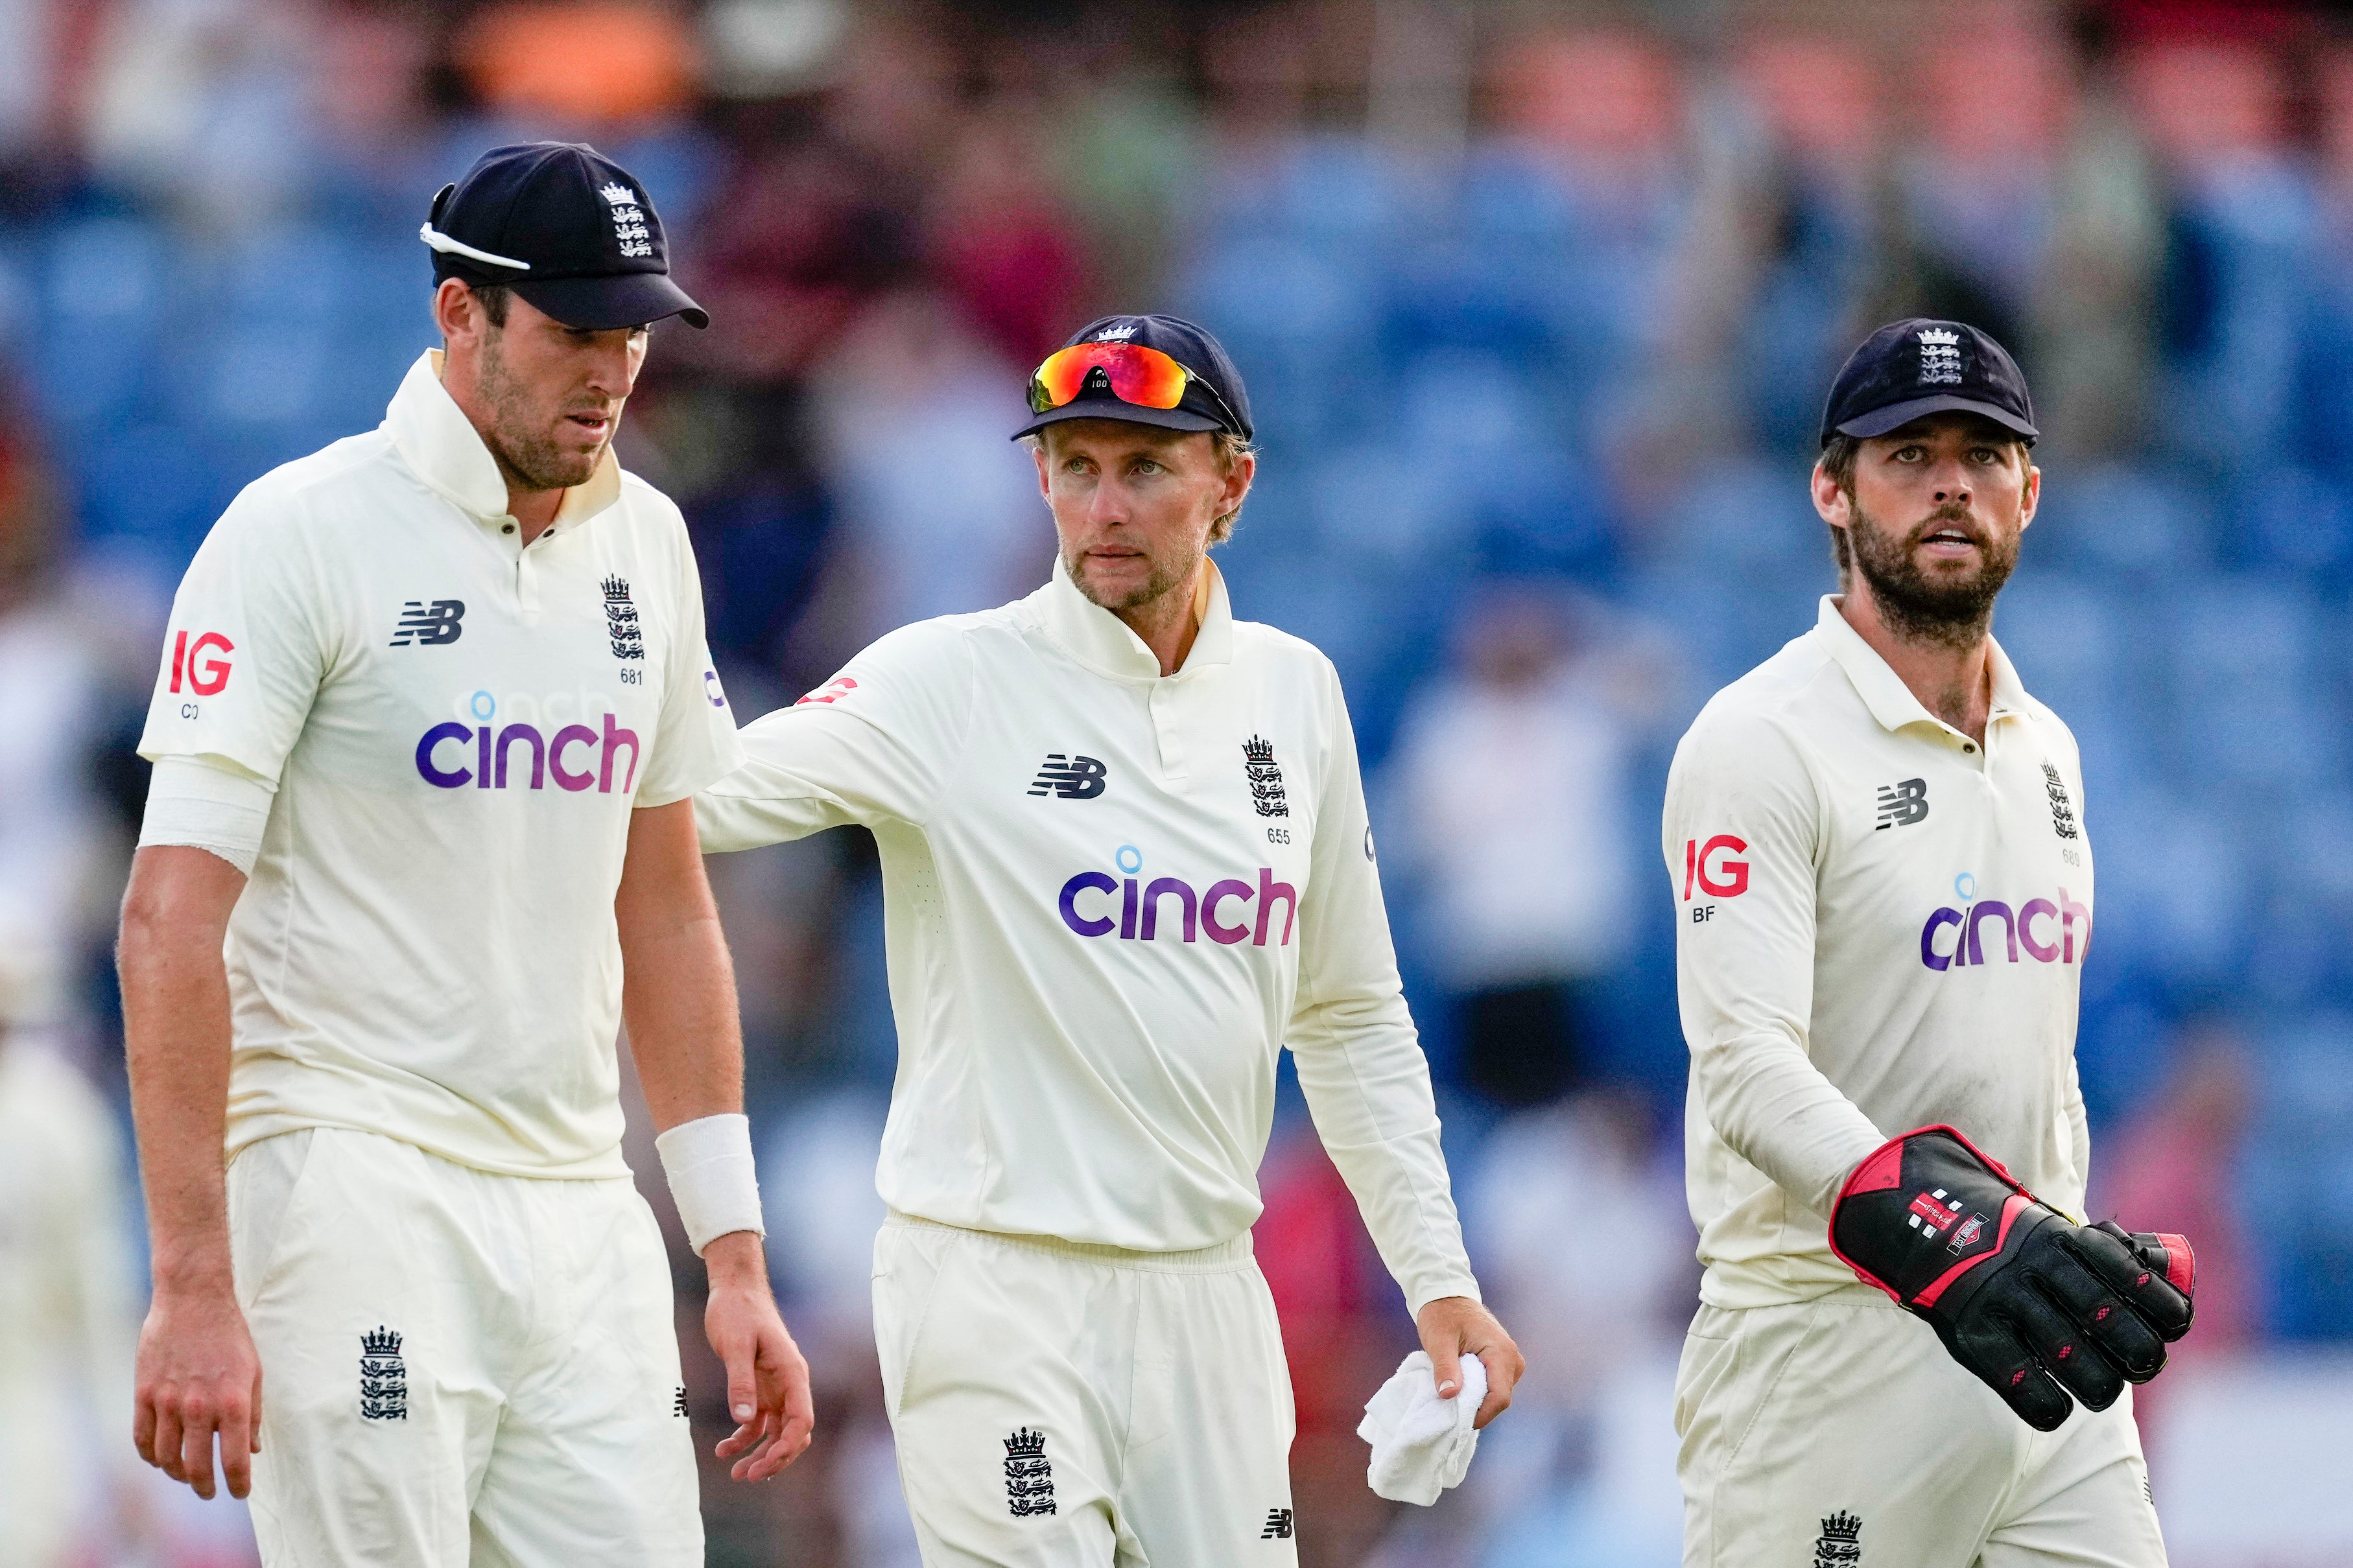 England’s captain Joe Root, centre, leaves the field with teammates Craig Overton, left, and Ben Foakes